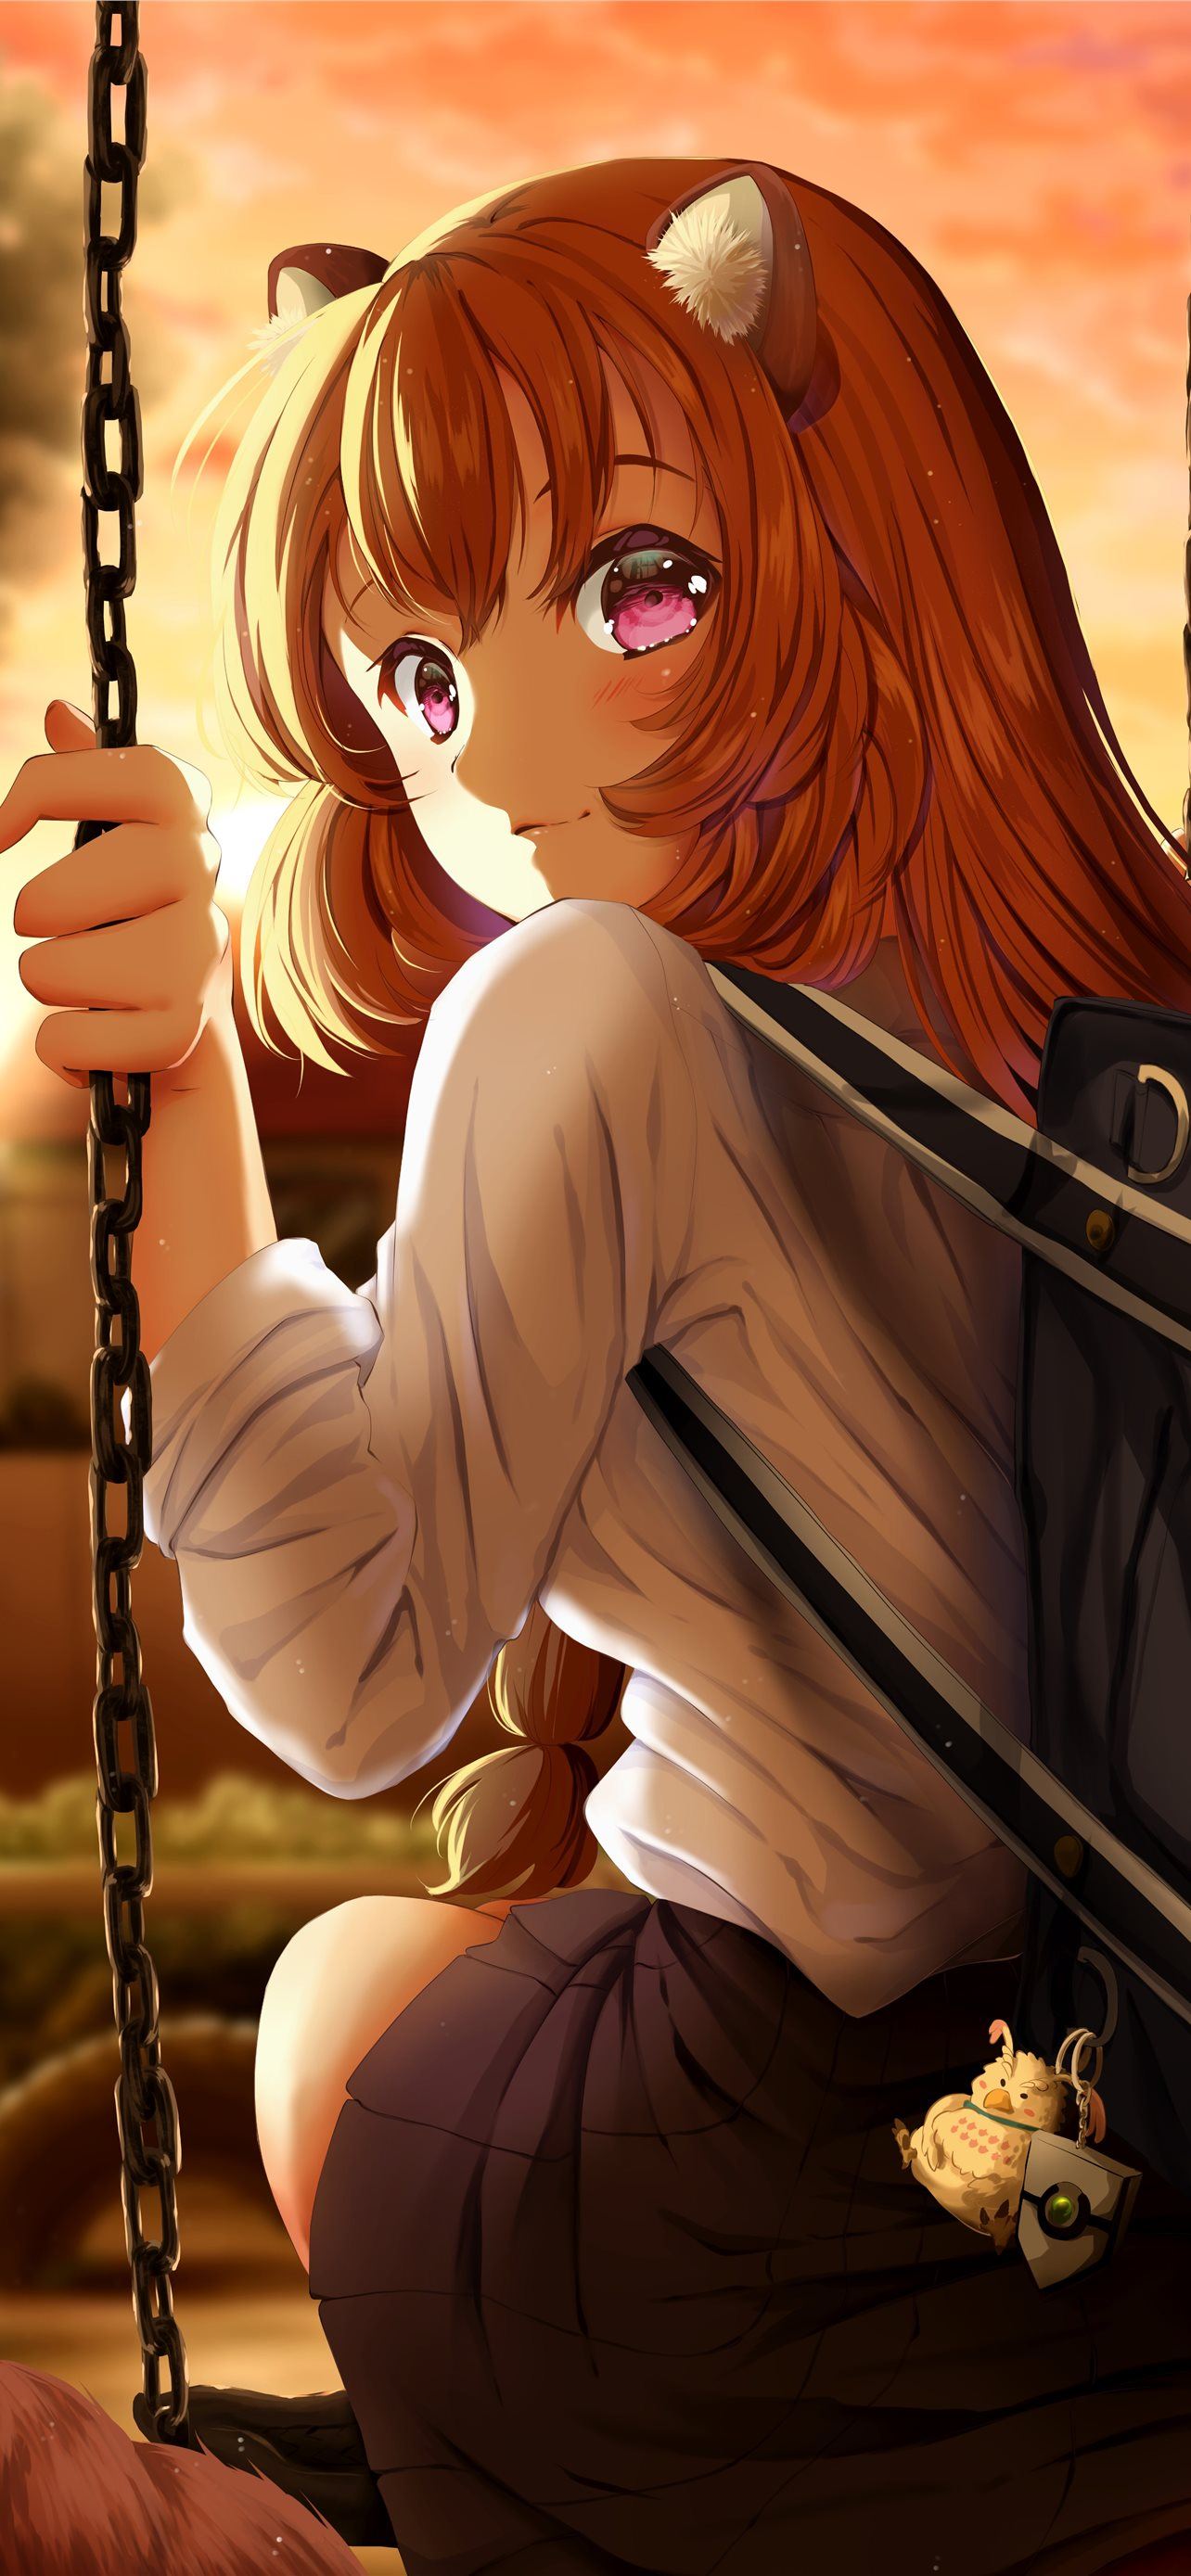 Mobile wallpaper: Anime, Raphtalia (The Rising Of The Shield Hero), The  Rising Of The Shield Hero, 957154 download the picture for free.